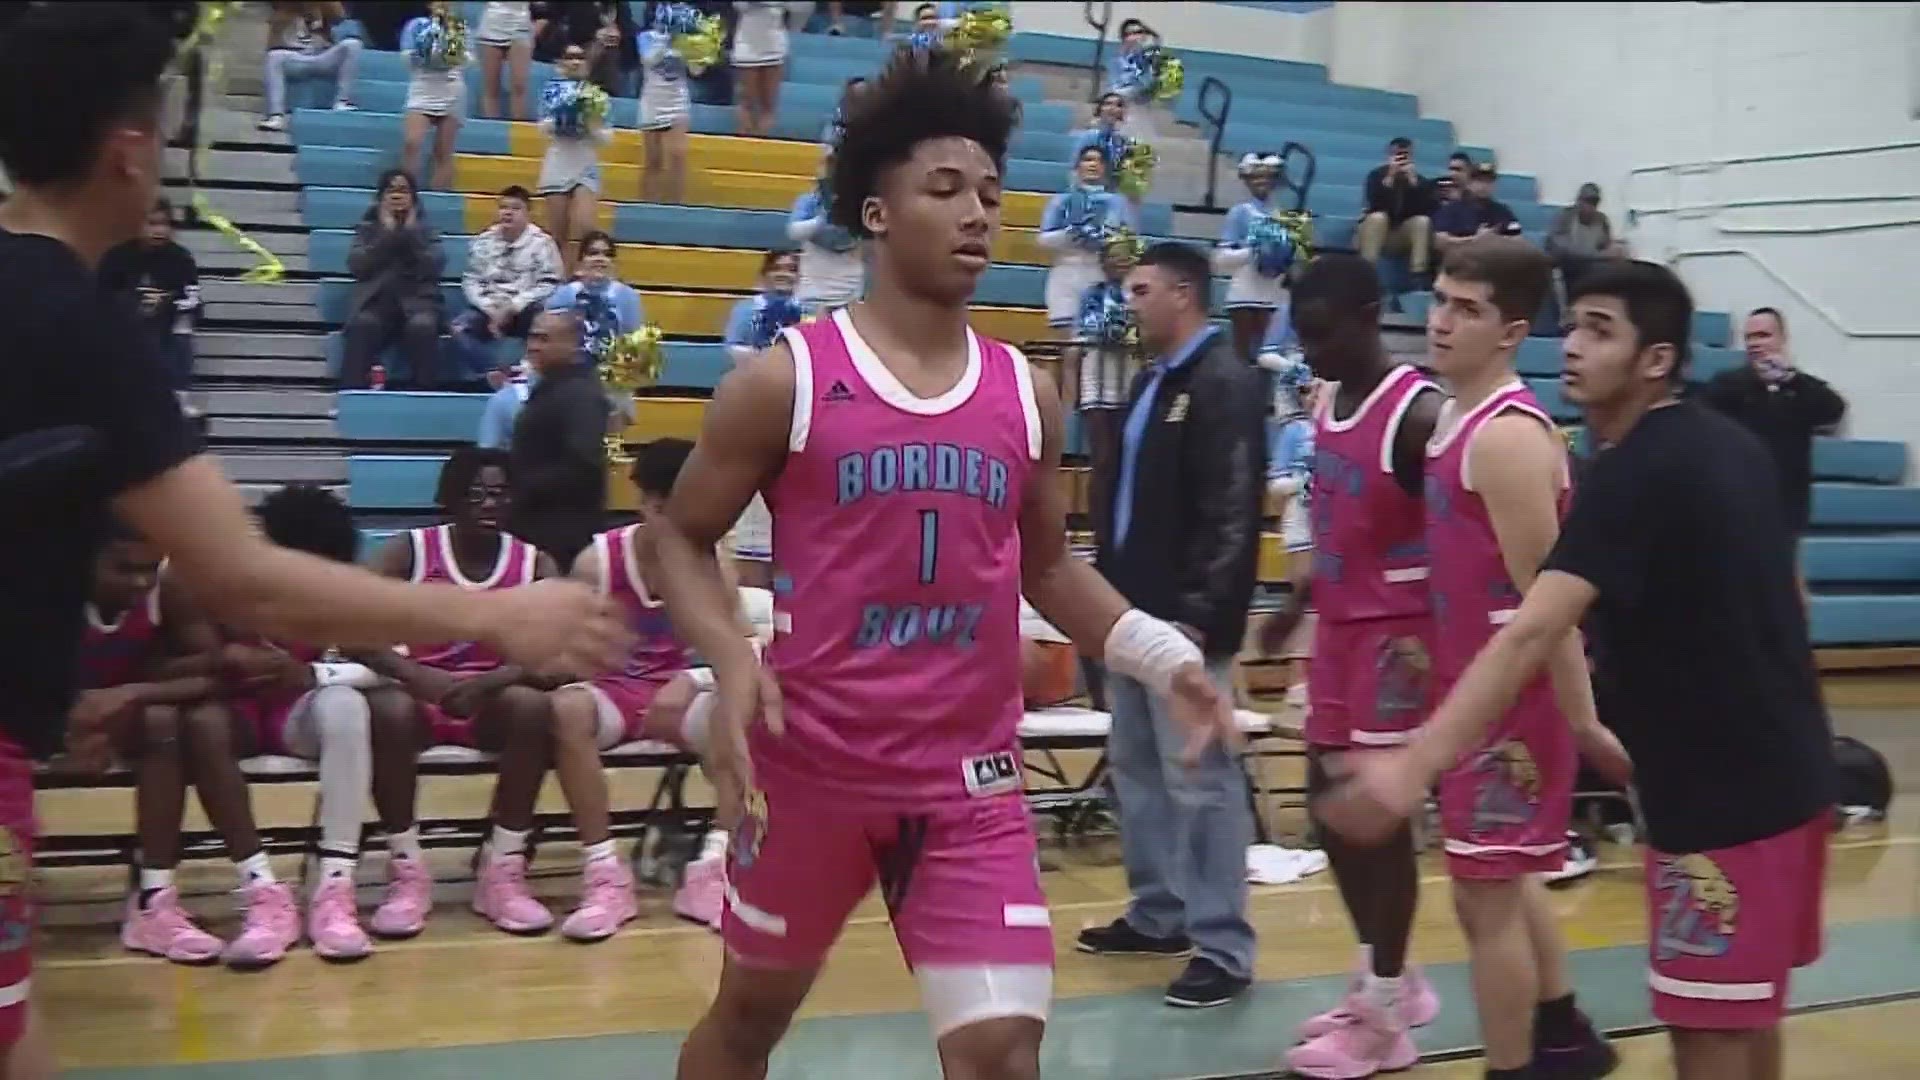 San Diego Sheriff's Department confirmed to CBS 8 that San Ysidro basketball star Michael Williams was arrested on five charges of assault with a deadly weapon.